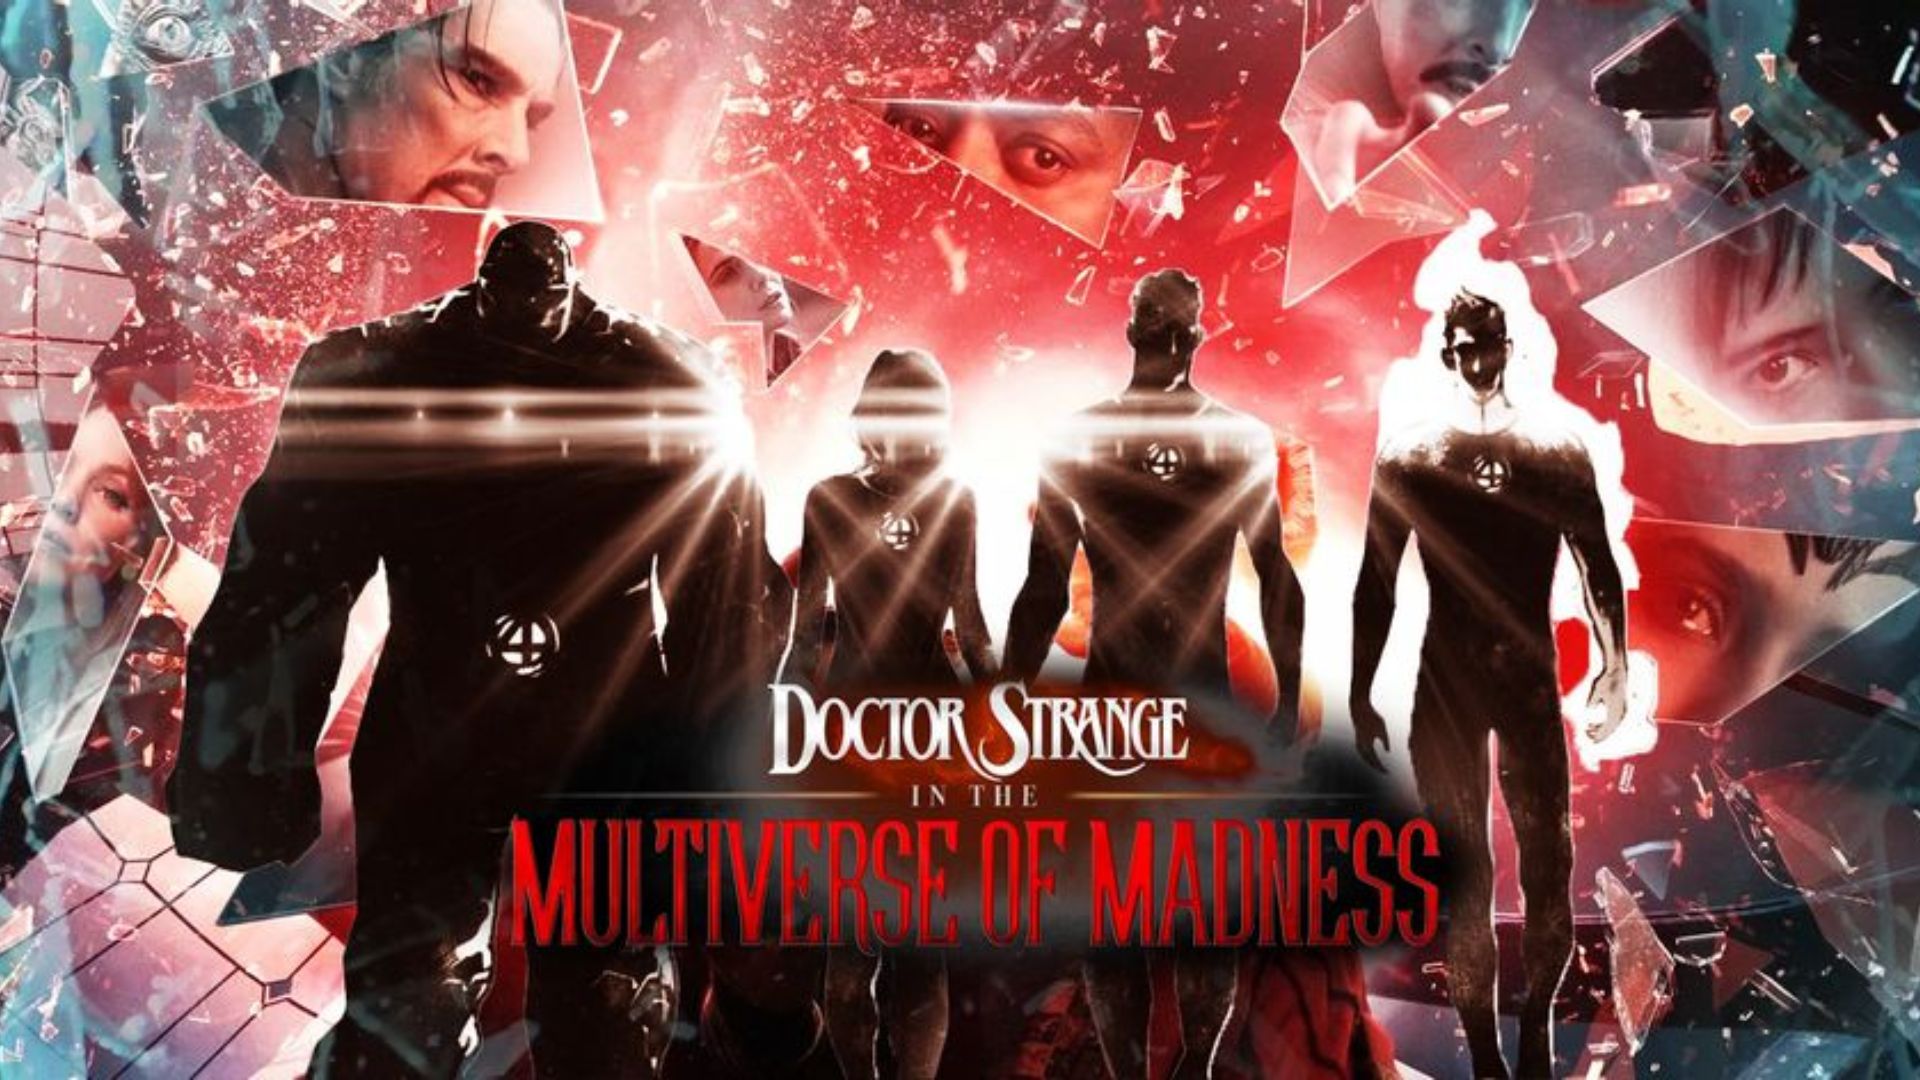 Wallpaper Doctor Strange in The Multiverse of Madness